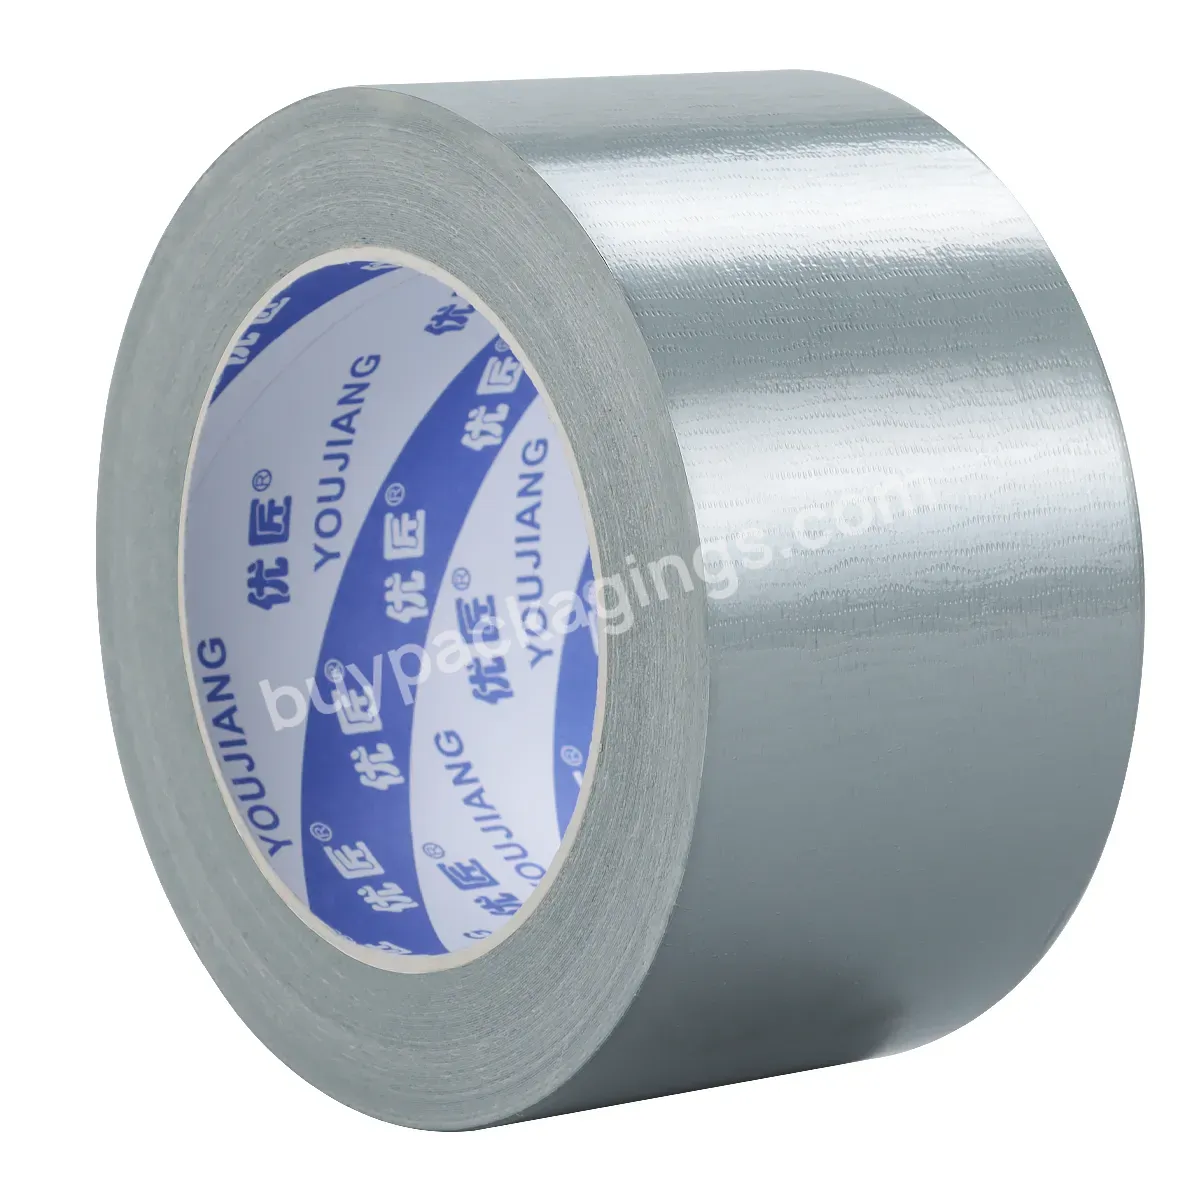 You Jiang Strong Duct Adhesive Cloth Decorative Label Sealing Wide Pe Coated Bondage Seal Flat Premium Tape - Buy High Adhesive Strength Mesh Double-sided Duct Tape,Duct Tape 3939,Resistant Tarpaulin Repair Adhesive Duct Tape.